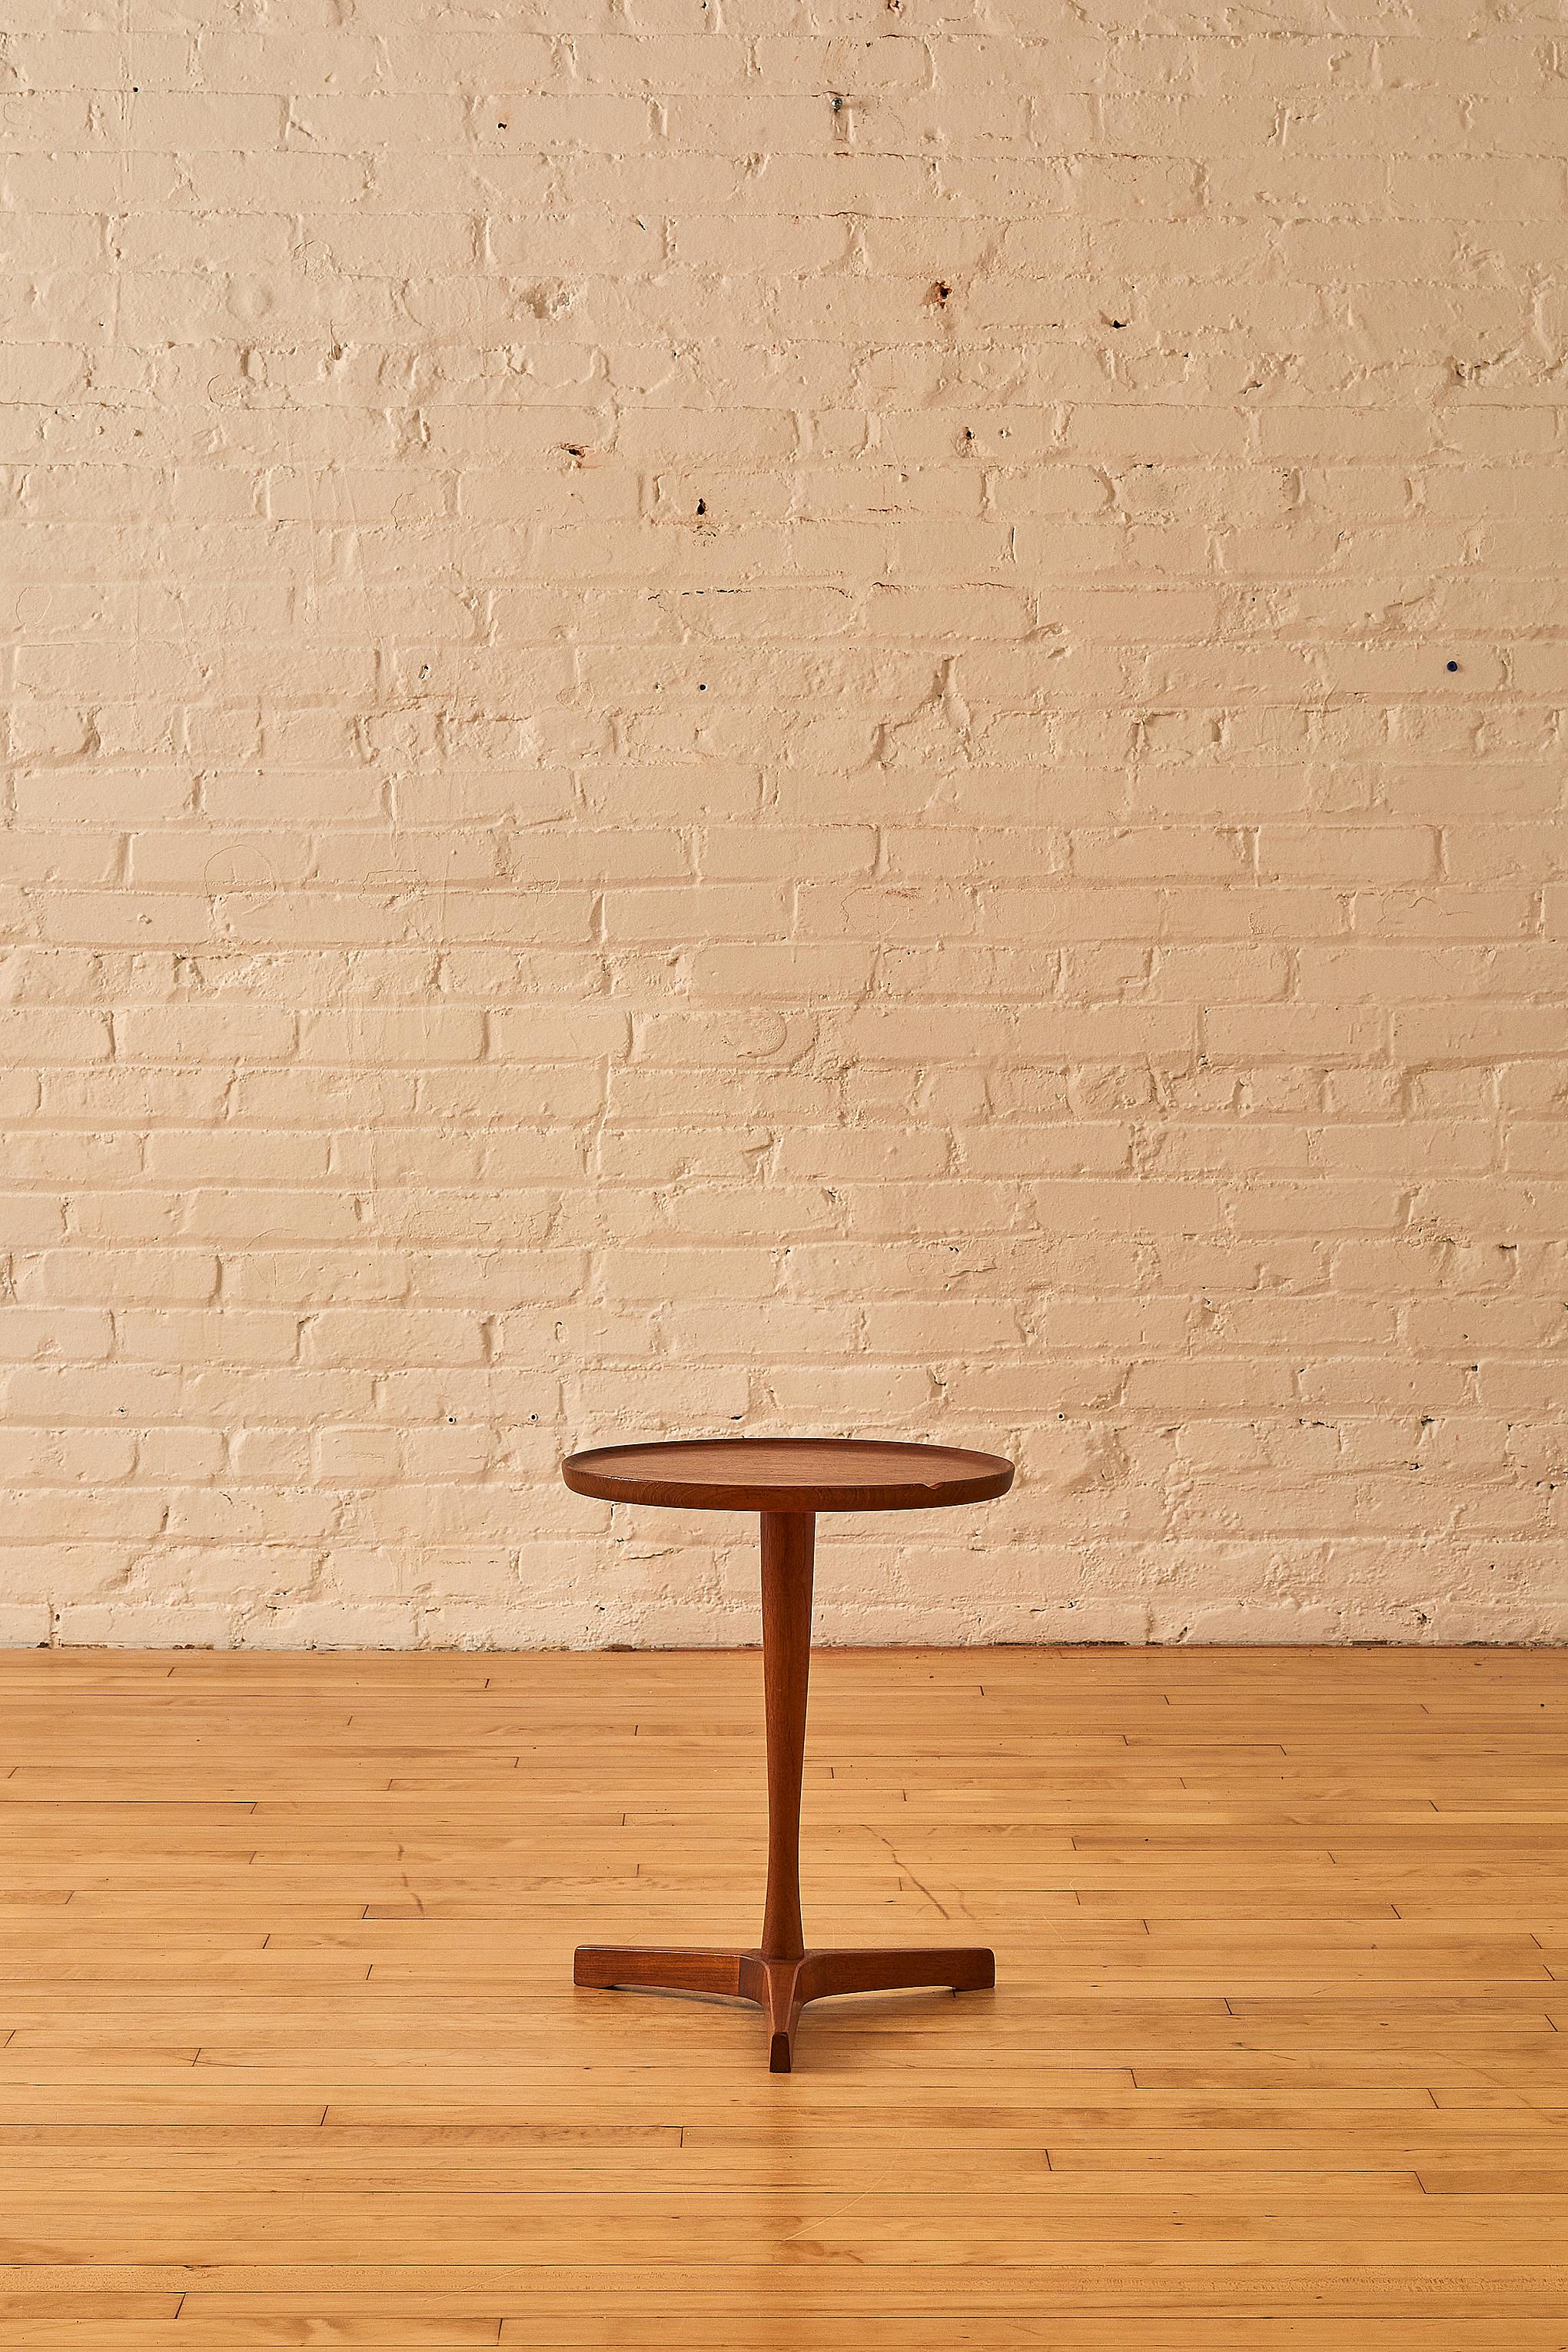 Occasional side table by Hans C. Andersen in walnut.

